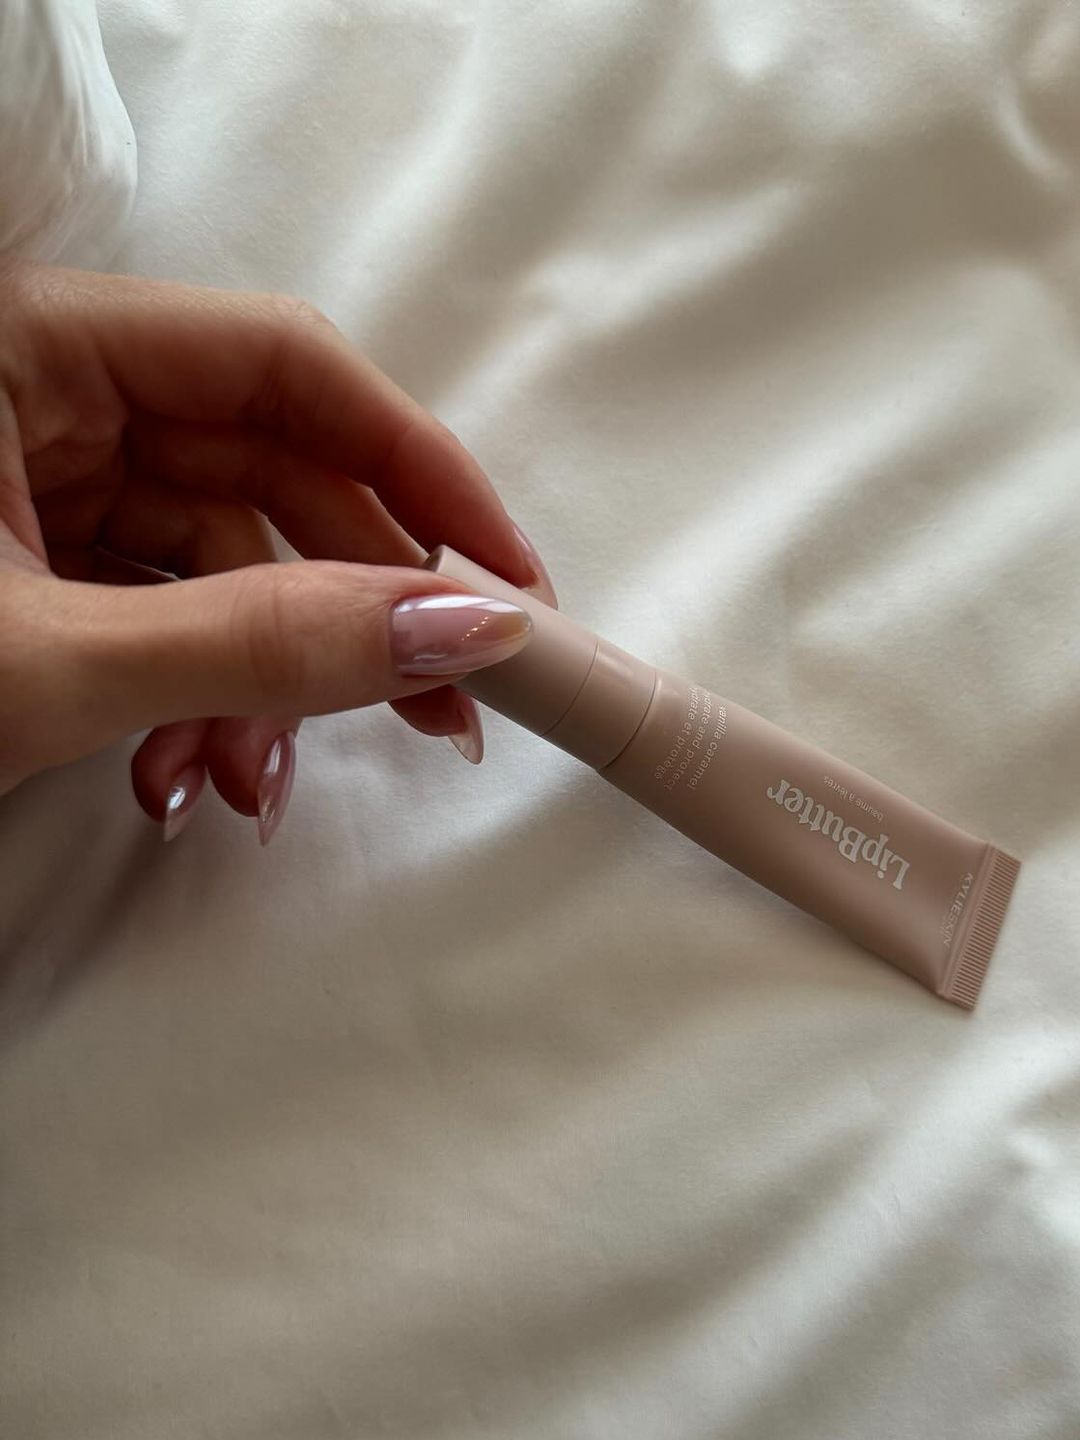 Kylie Jenner shares a close up of her manicure on Instagram